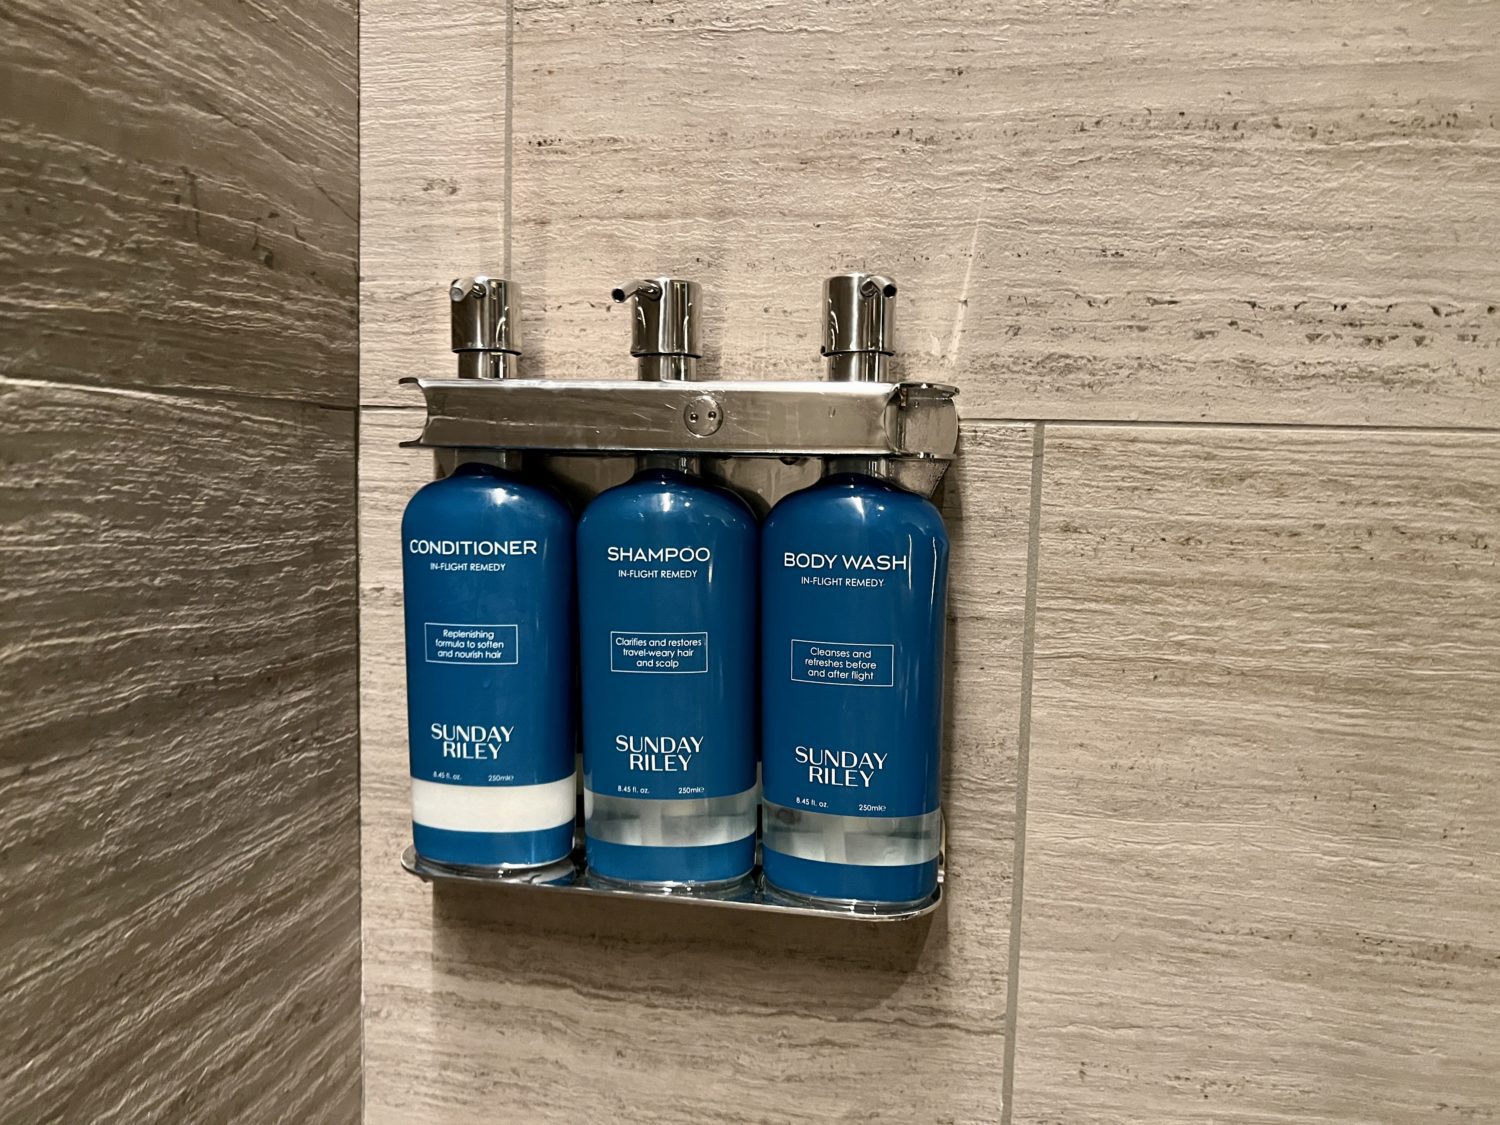 united polaris lounge chicago shower toiletries  Beautiful But Busy: United Polaris Lounge Chicago-O&#039;Hare (ORD) Review – Thrifty Traveler &#8211; Thrifty Traveler united polaris chicago lounge shower toiletries scaled